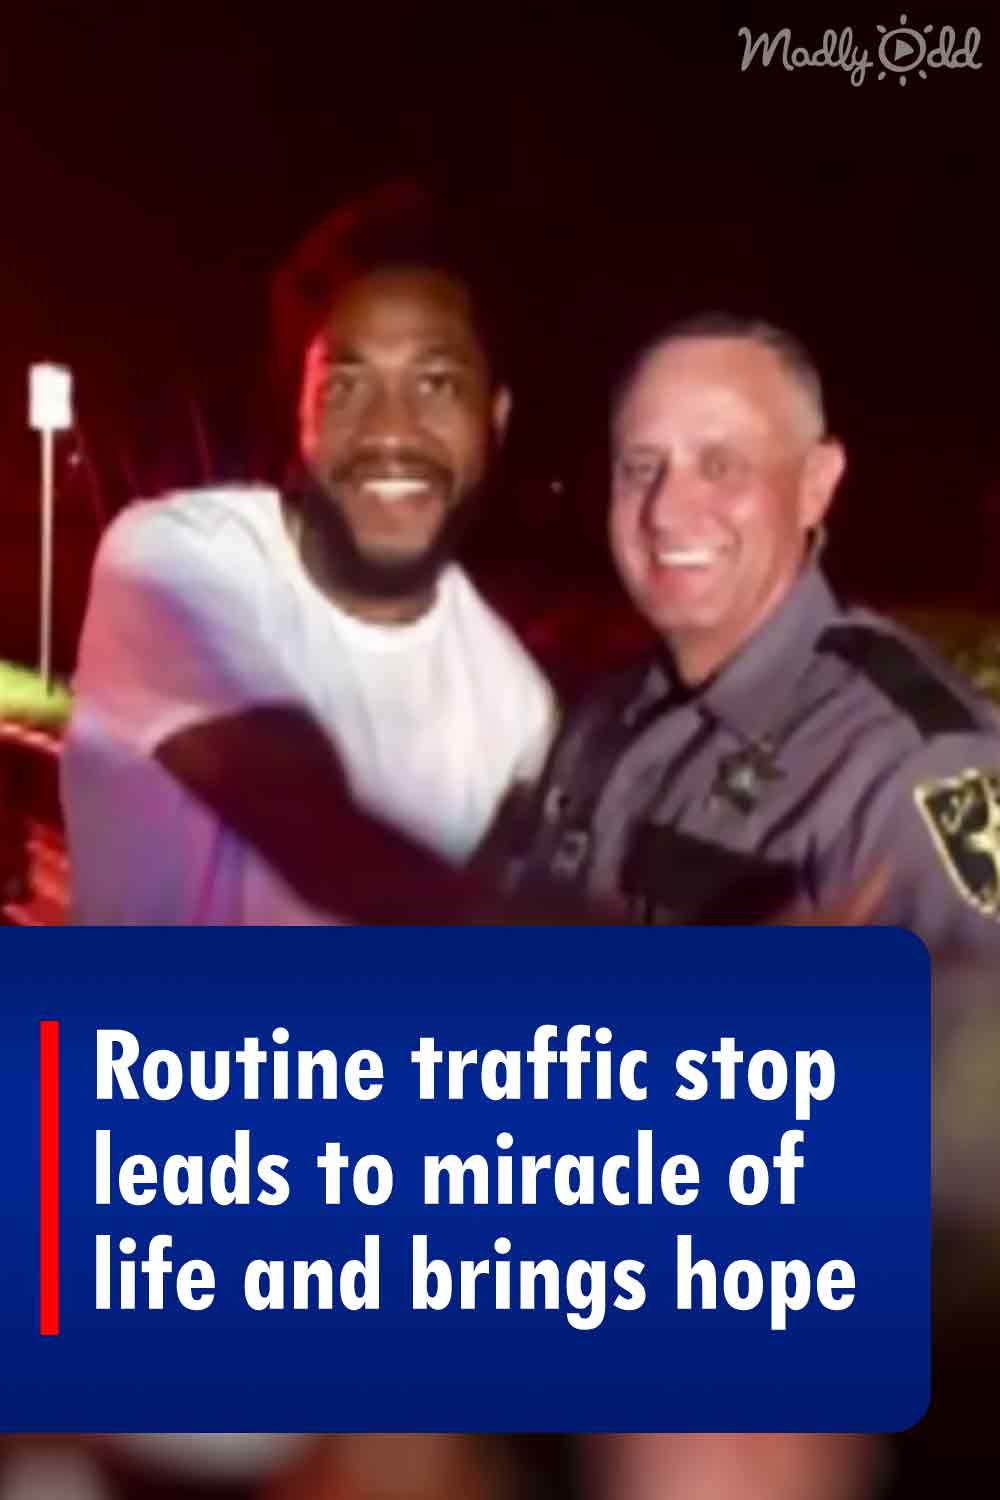 Routine traffic stop leads to miracle of life and brings hope